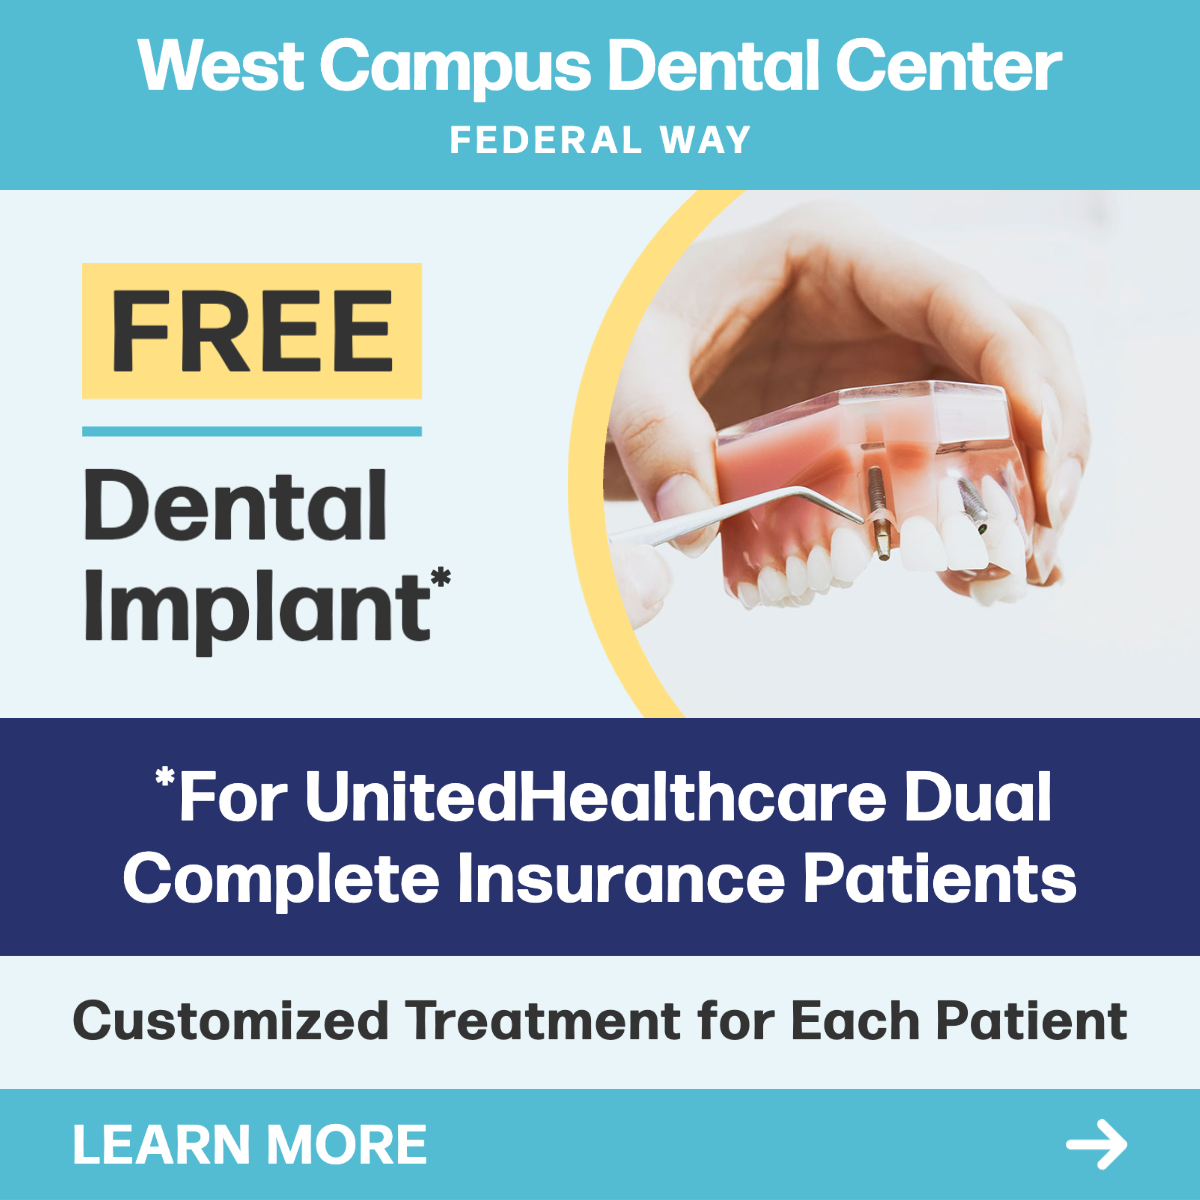 Free Dental Implant - Terms and Conditions May Apply